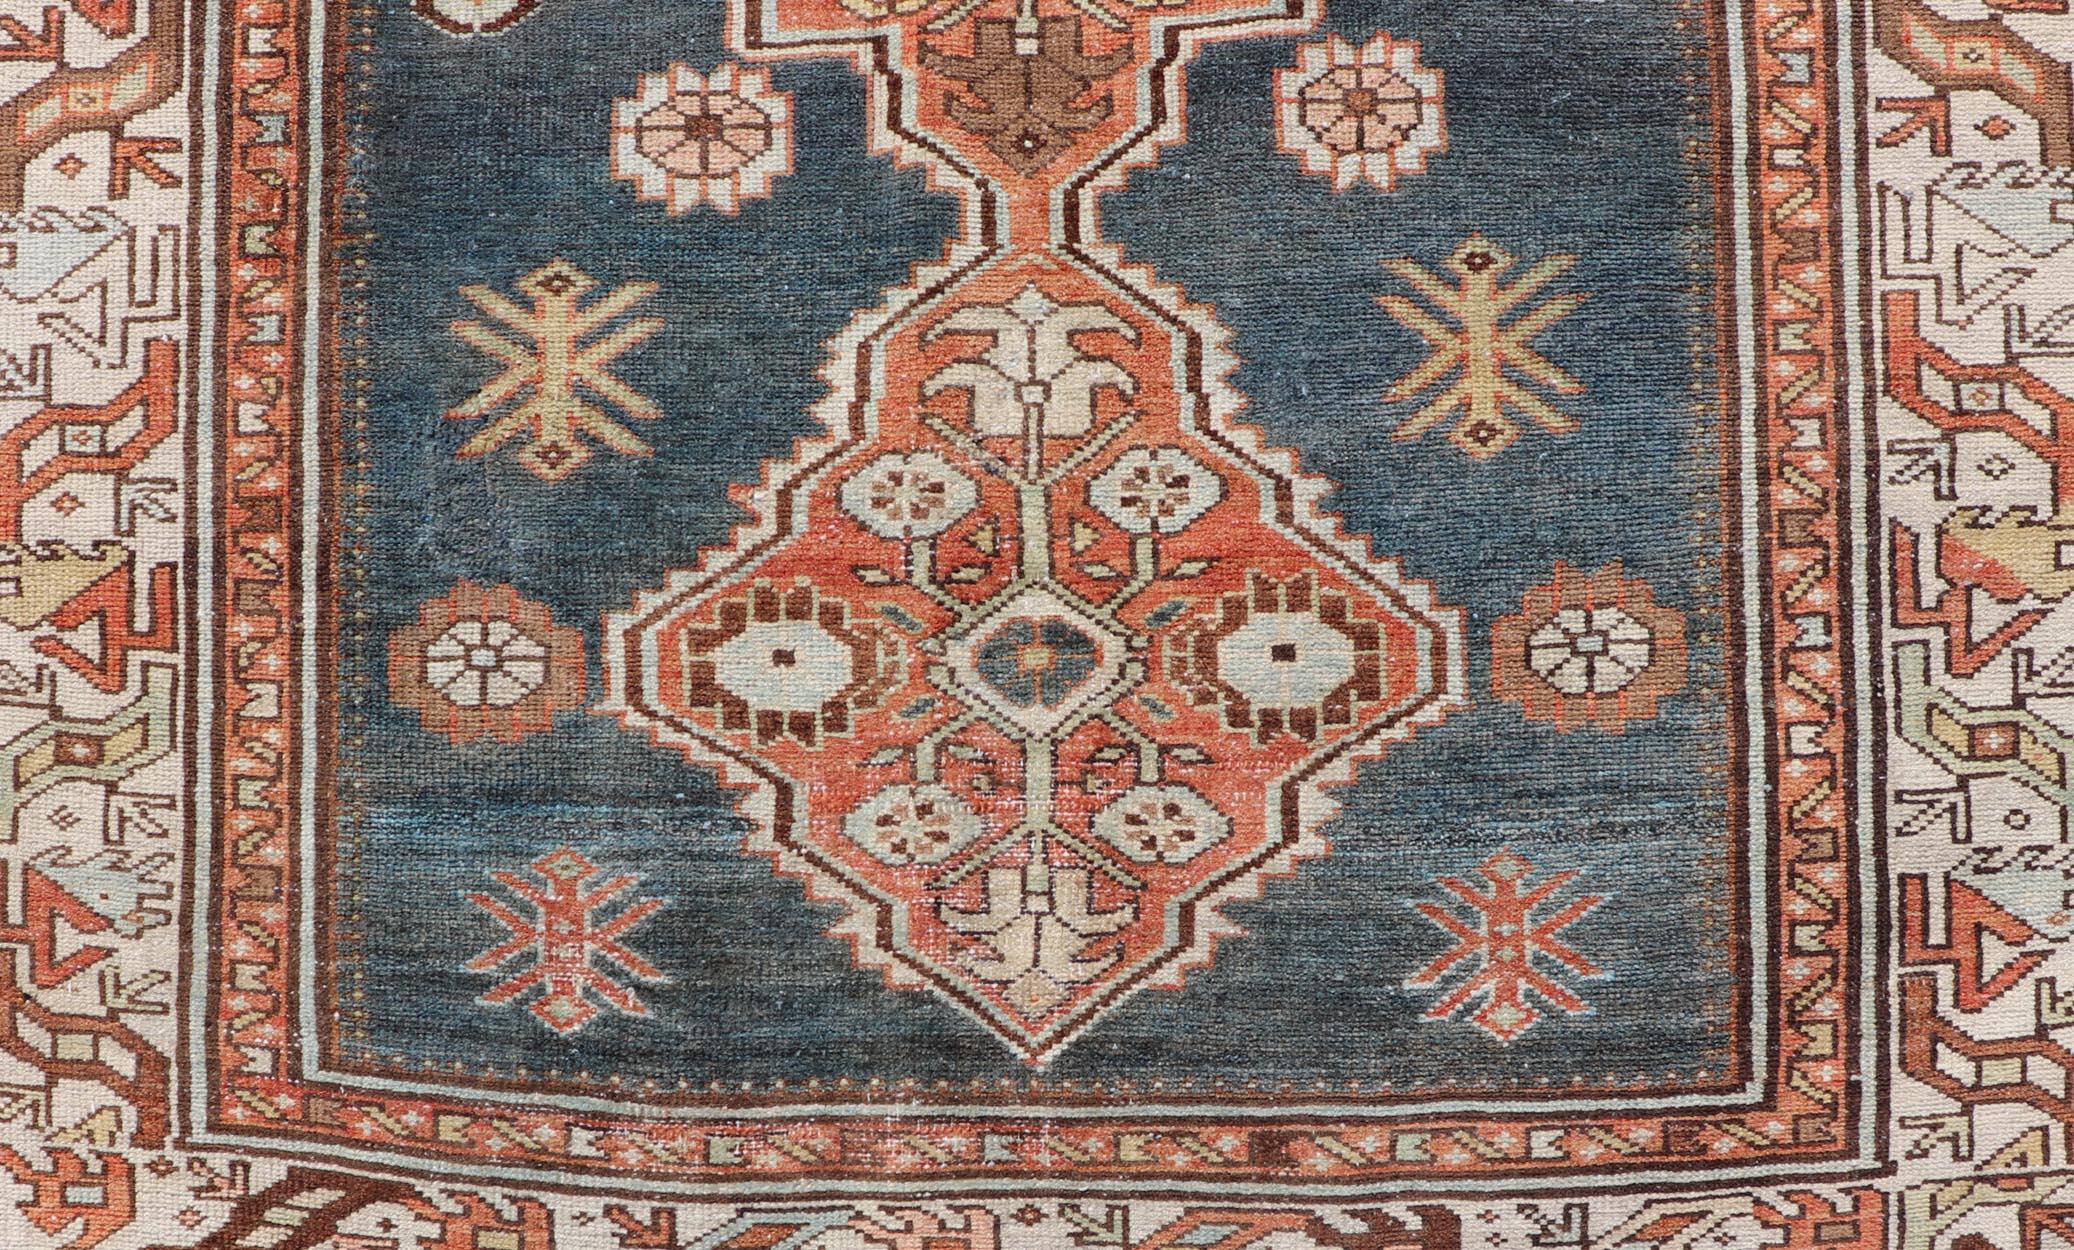 Antique Persian Hamadan Rug with Central Sub-Geometric Medallion In Blue-Gray. Keivan Woven Arts; rug EMB-22170-15064; country of origin / type: Persian / Hamadan, circa 1920.
Measures: 4'1 x 6'6
This antique Persian Hamadan rug features a layered